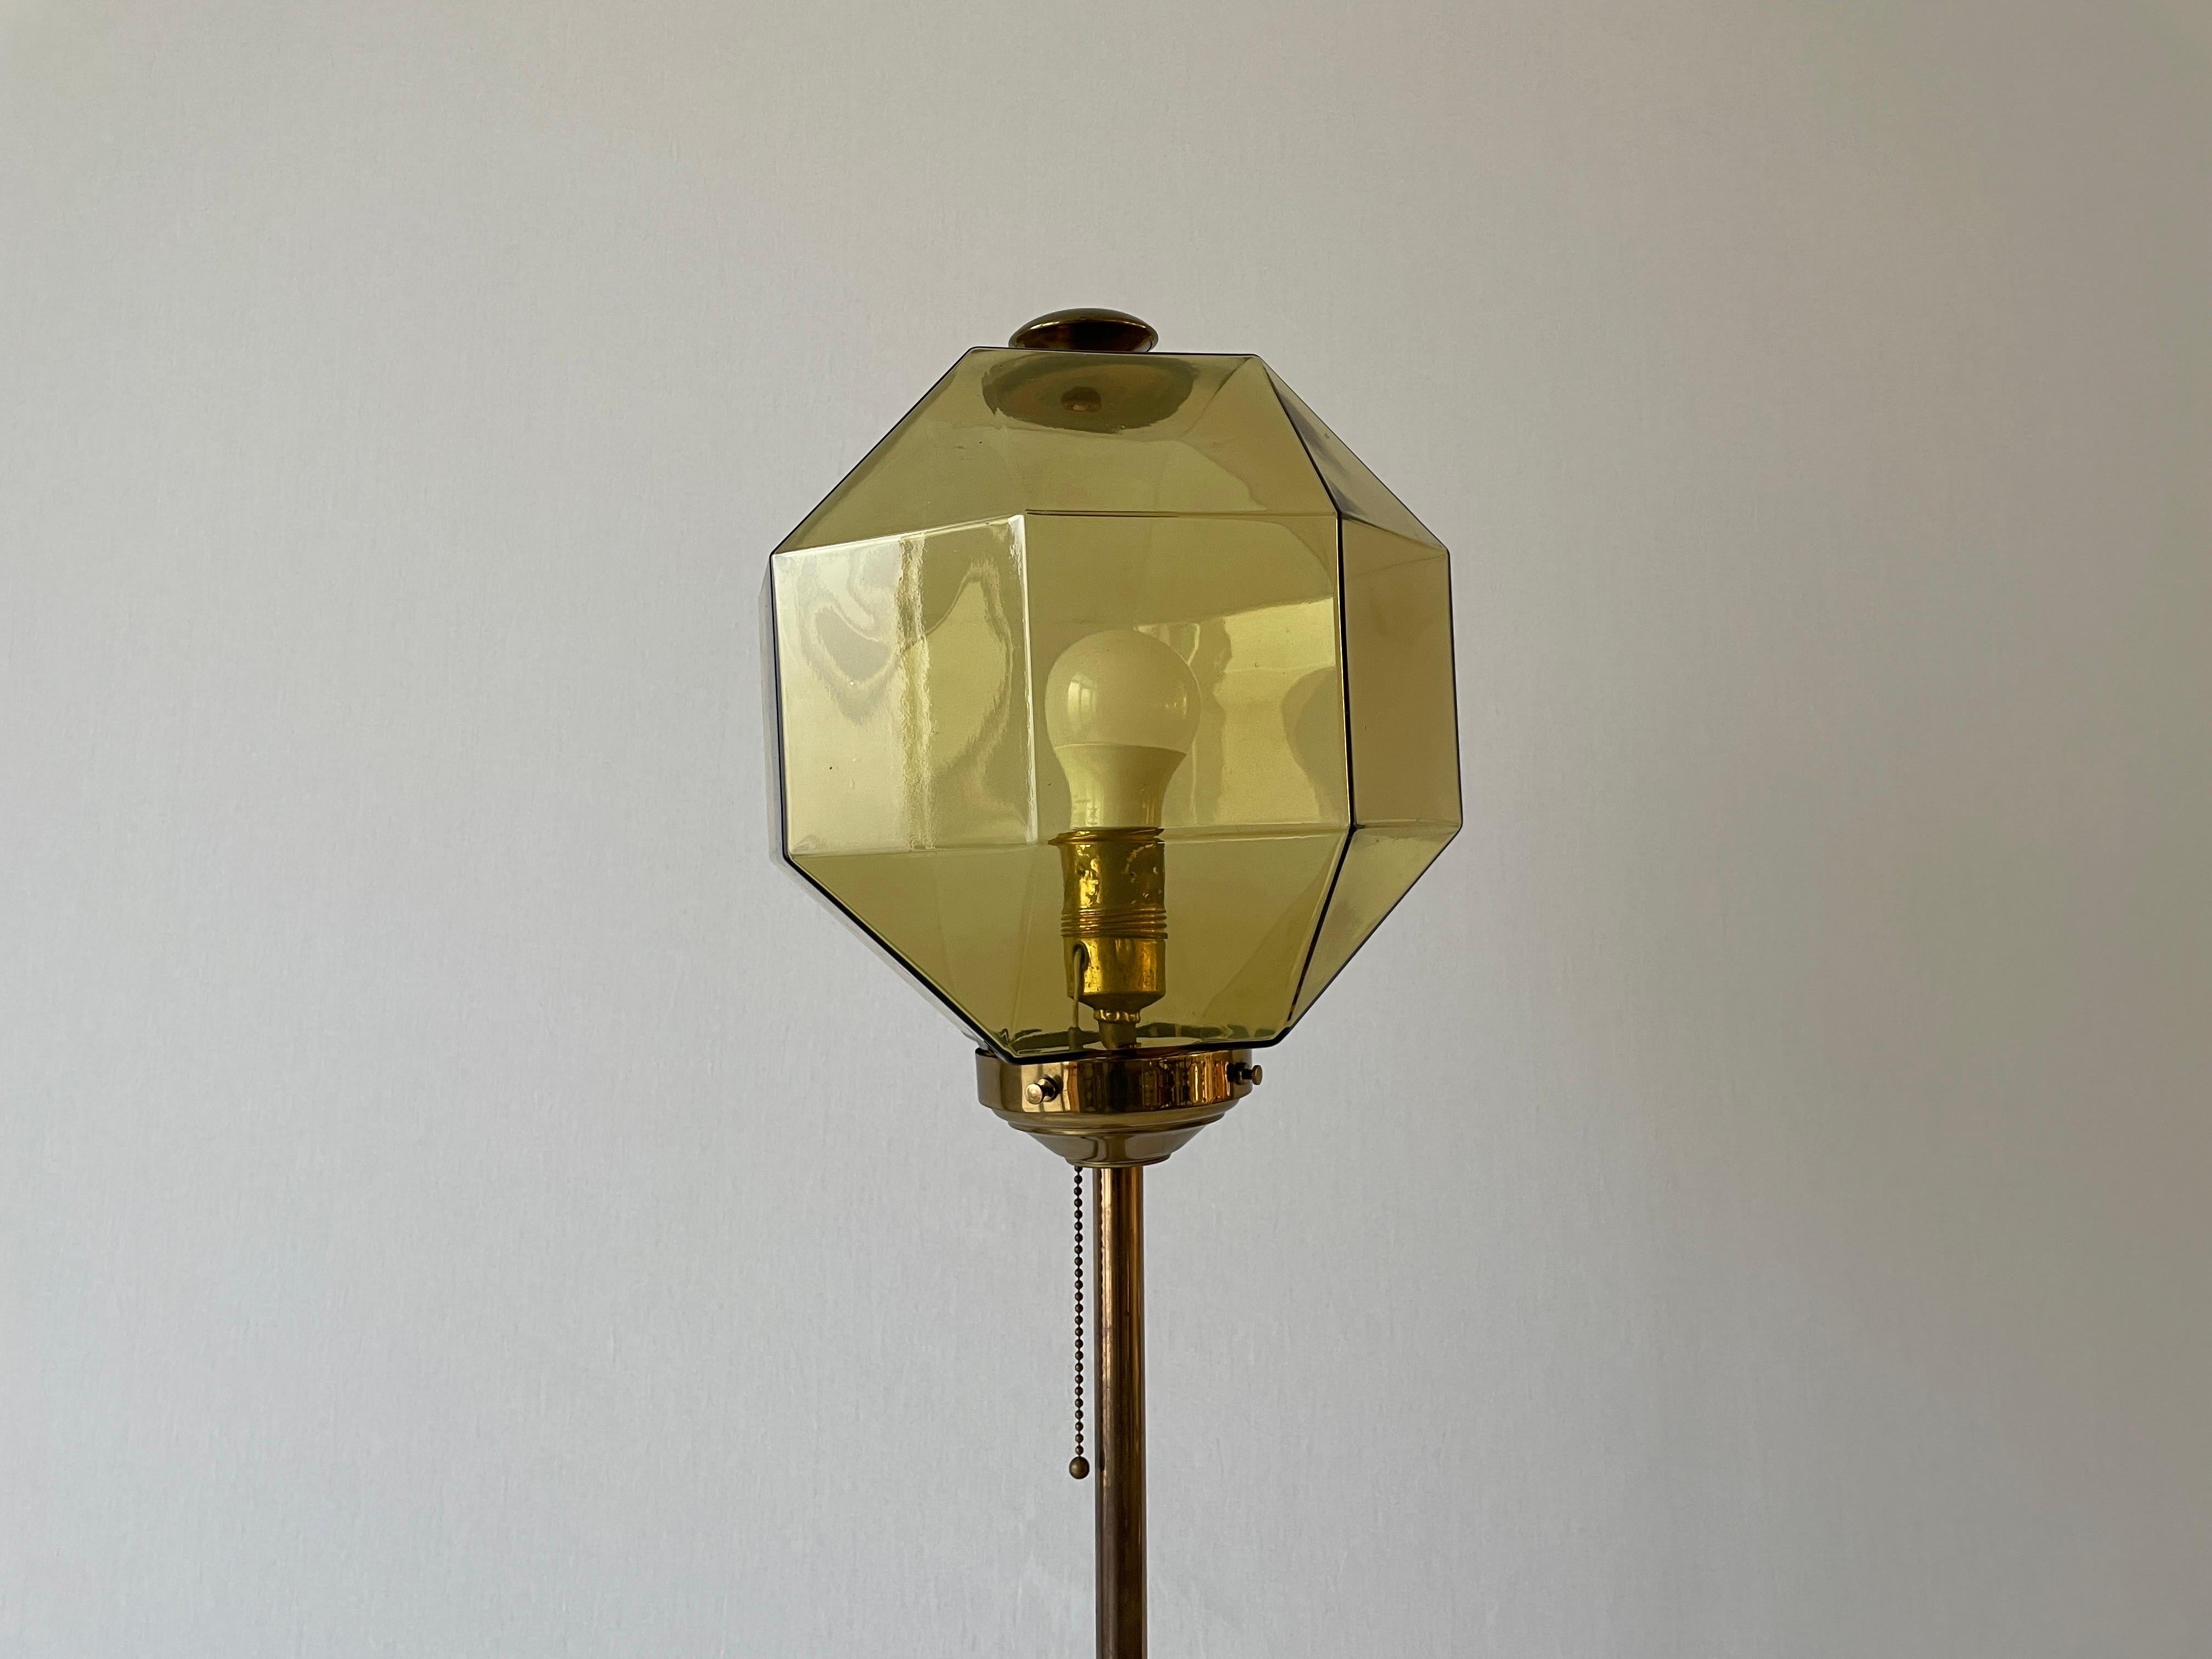 Glass Lampshade and Brass Body Floor Lamp by Bergboms, 1960s, Sweden

This lamp works with E27 light bulb. Max 100W
Wired and suitable to use with 220V and 110V for all countries.

Measurements:
Total height: 125 cm
Glass shade height : 26 cm
Glass